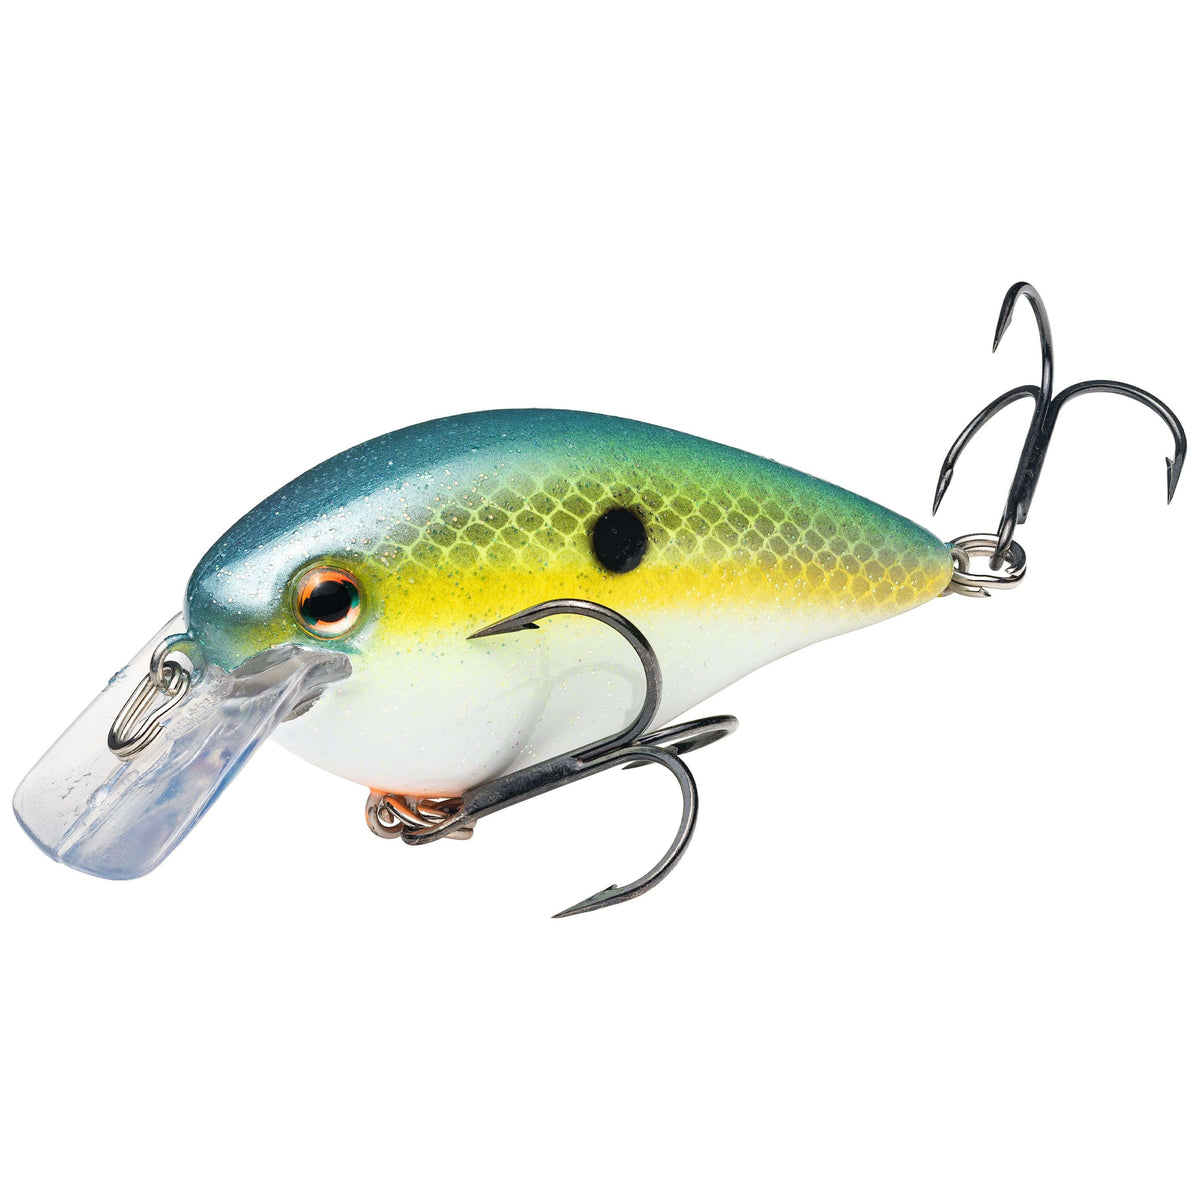 Strike King KVD Square Bill 2.5 Clear Ghost Sexy Shad